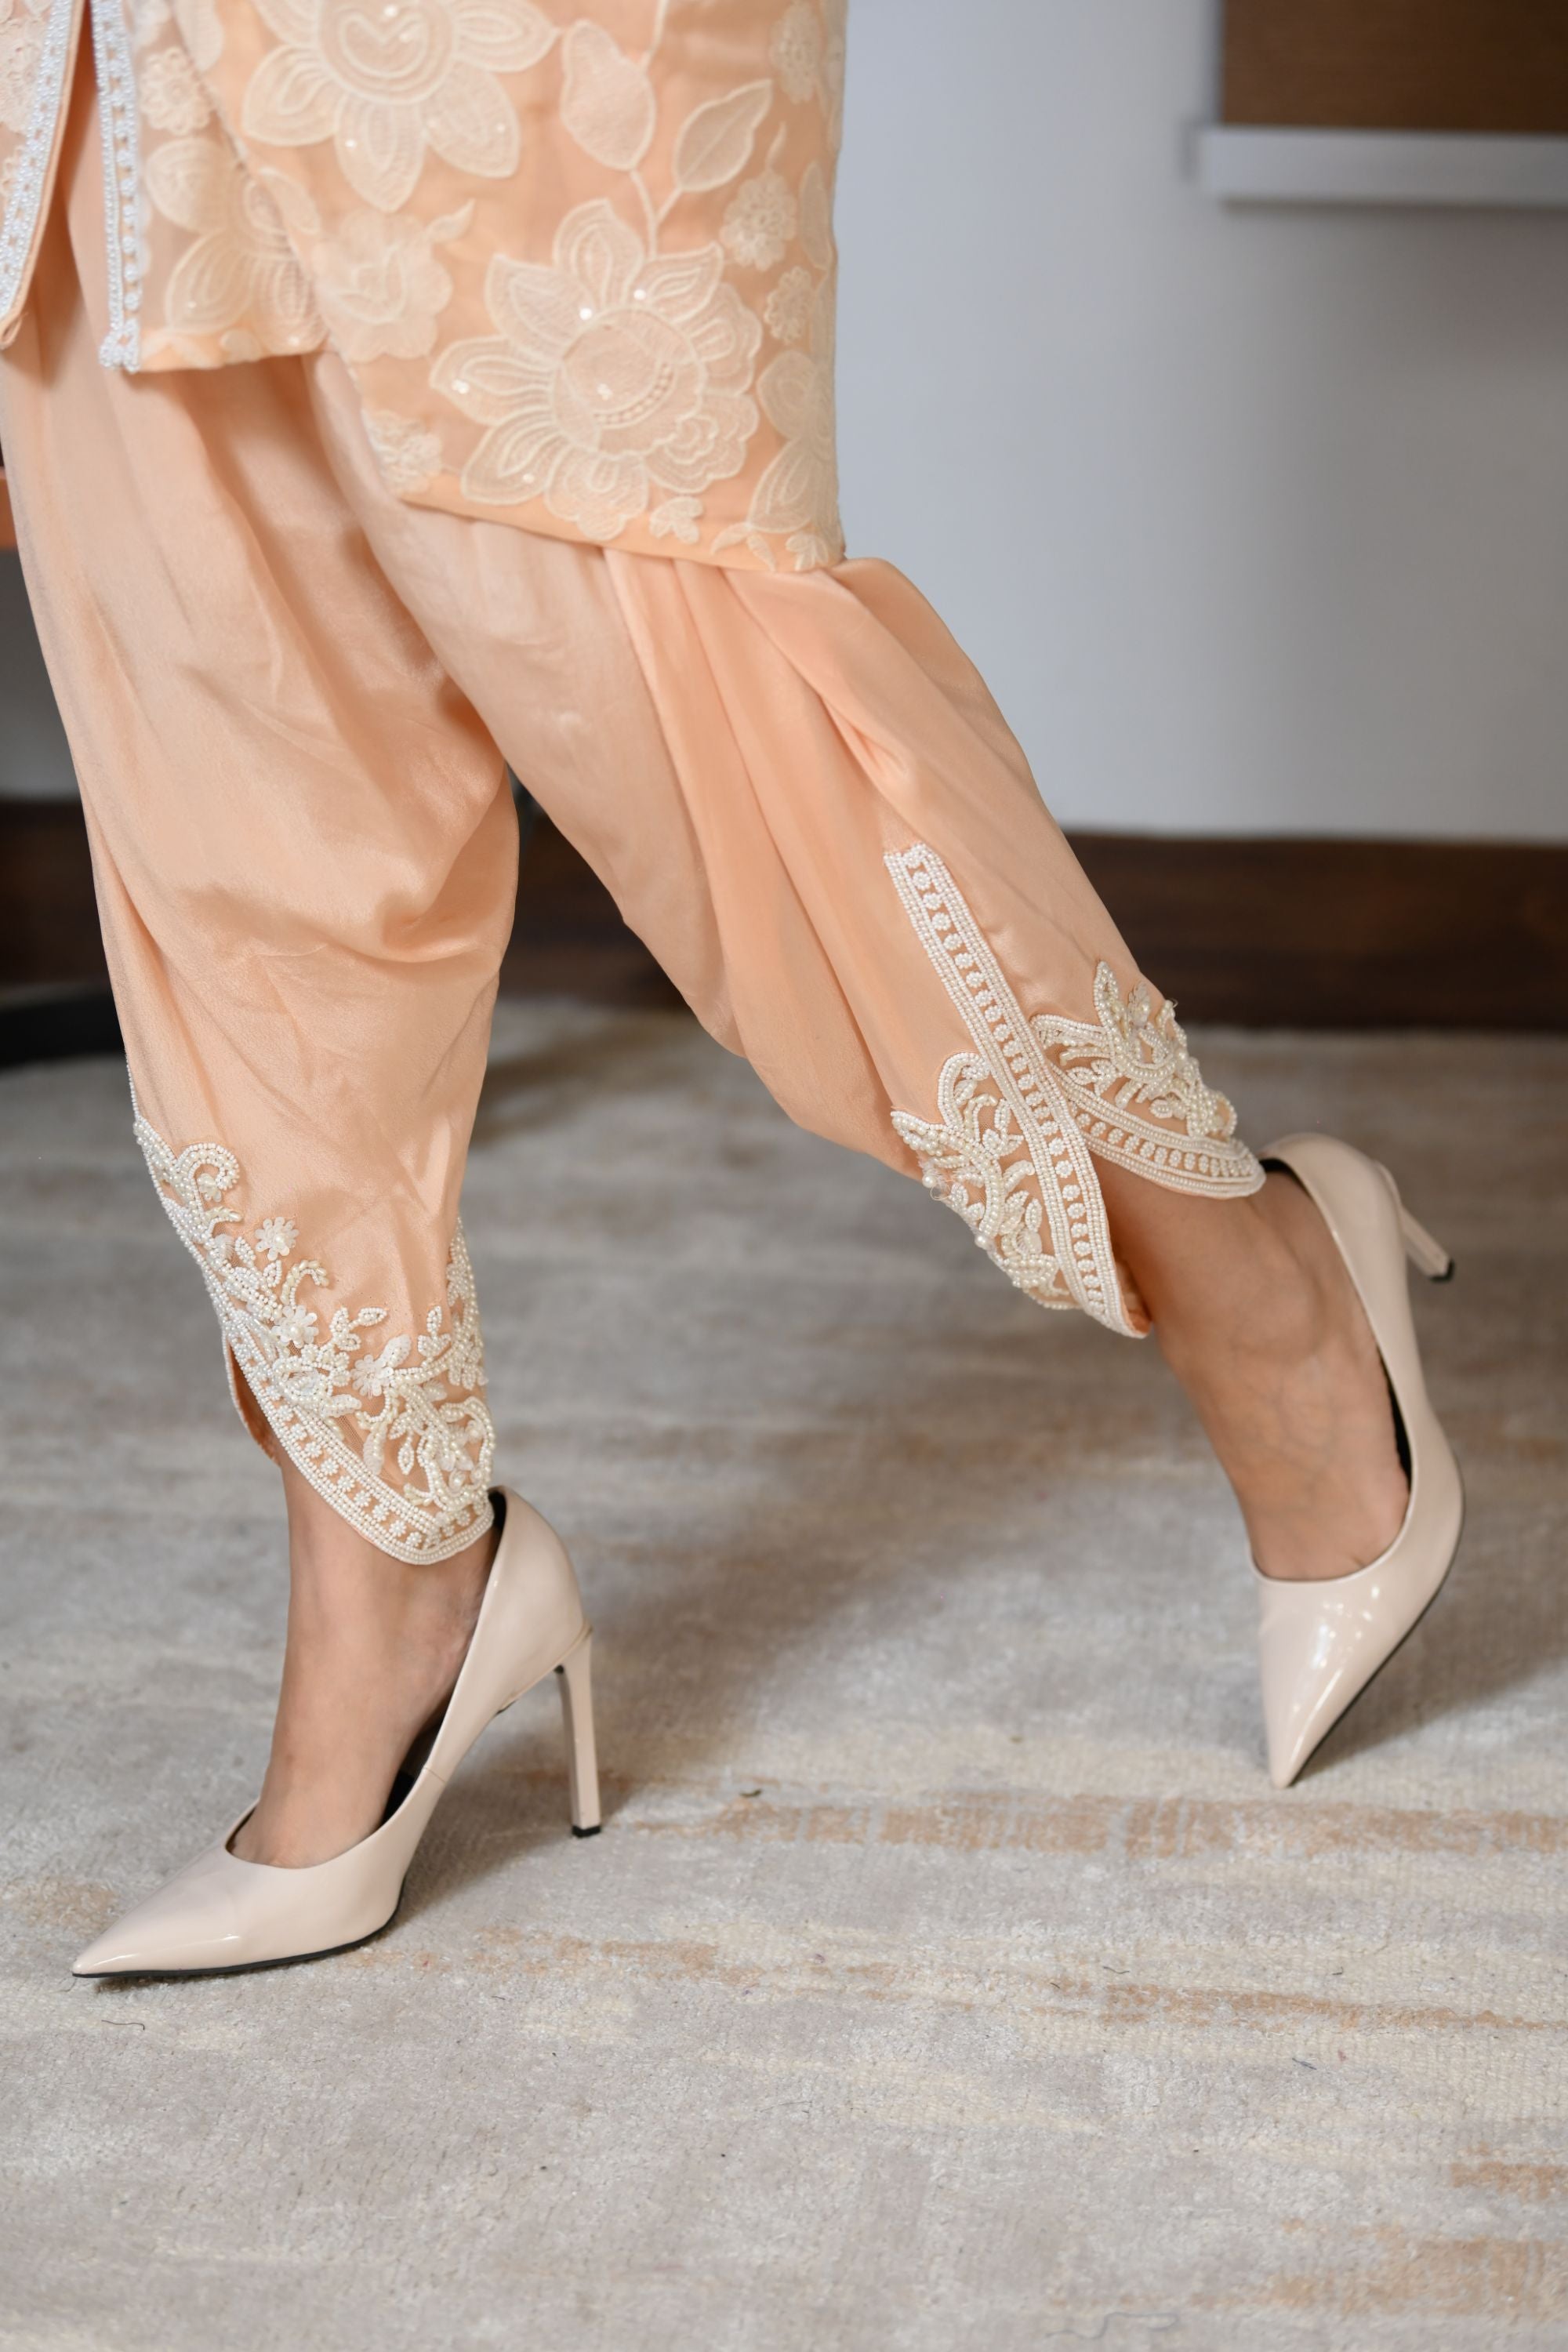 Peach Embroidered Top with Tulip Pants